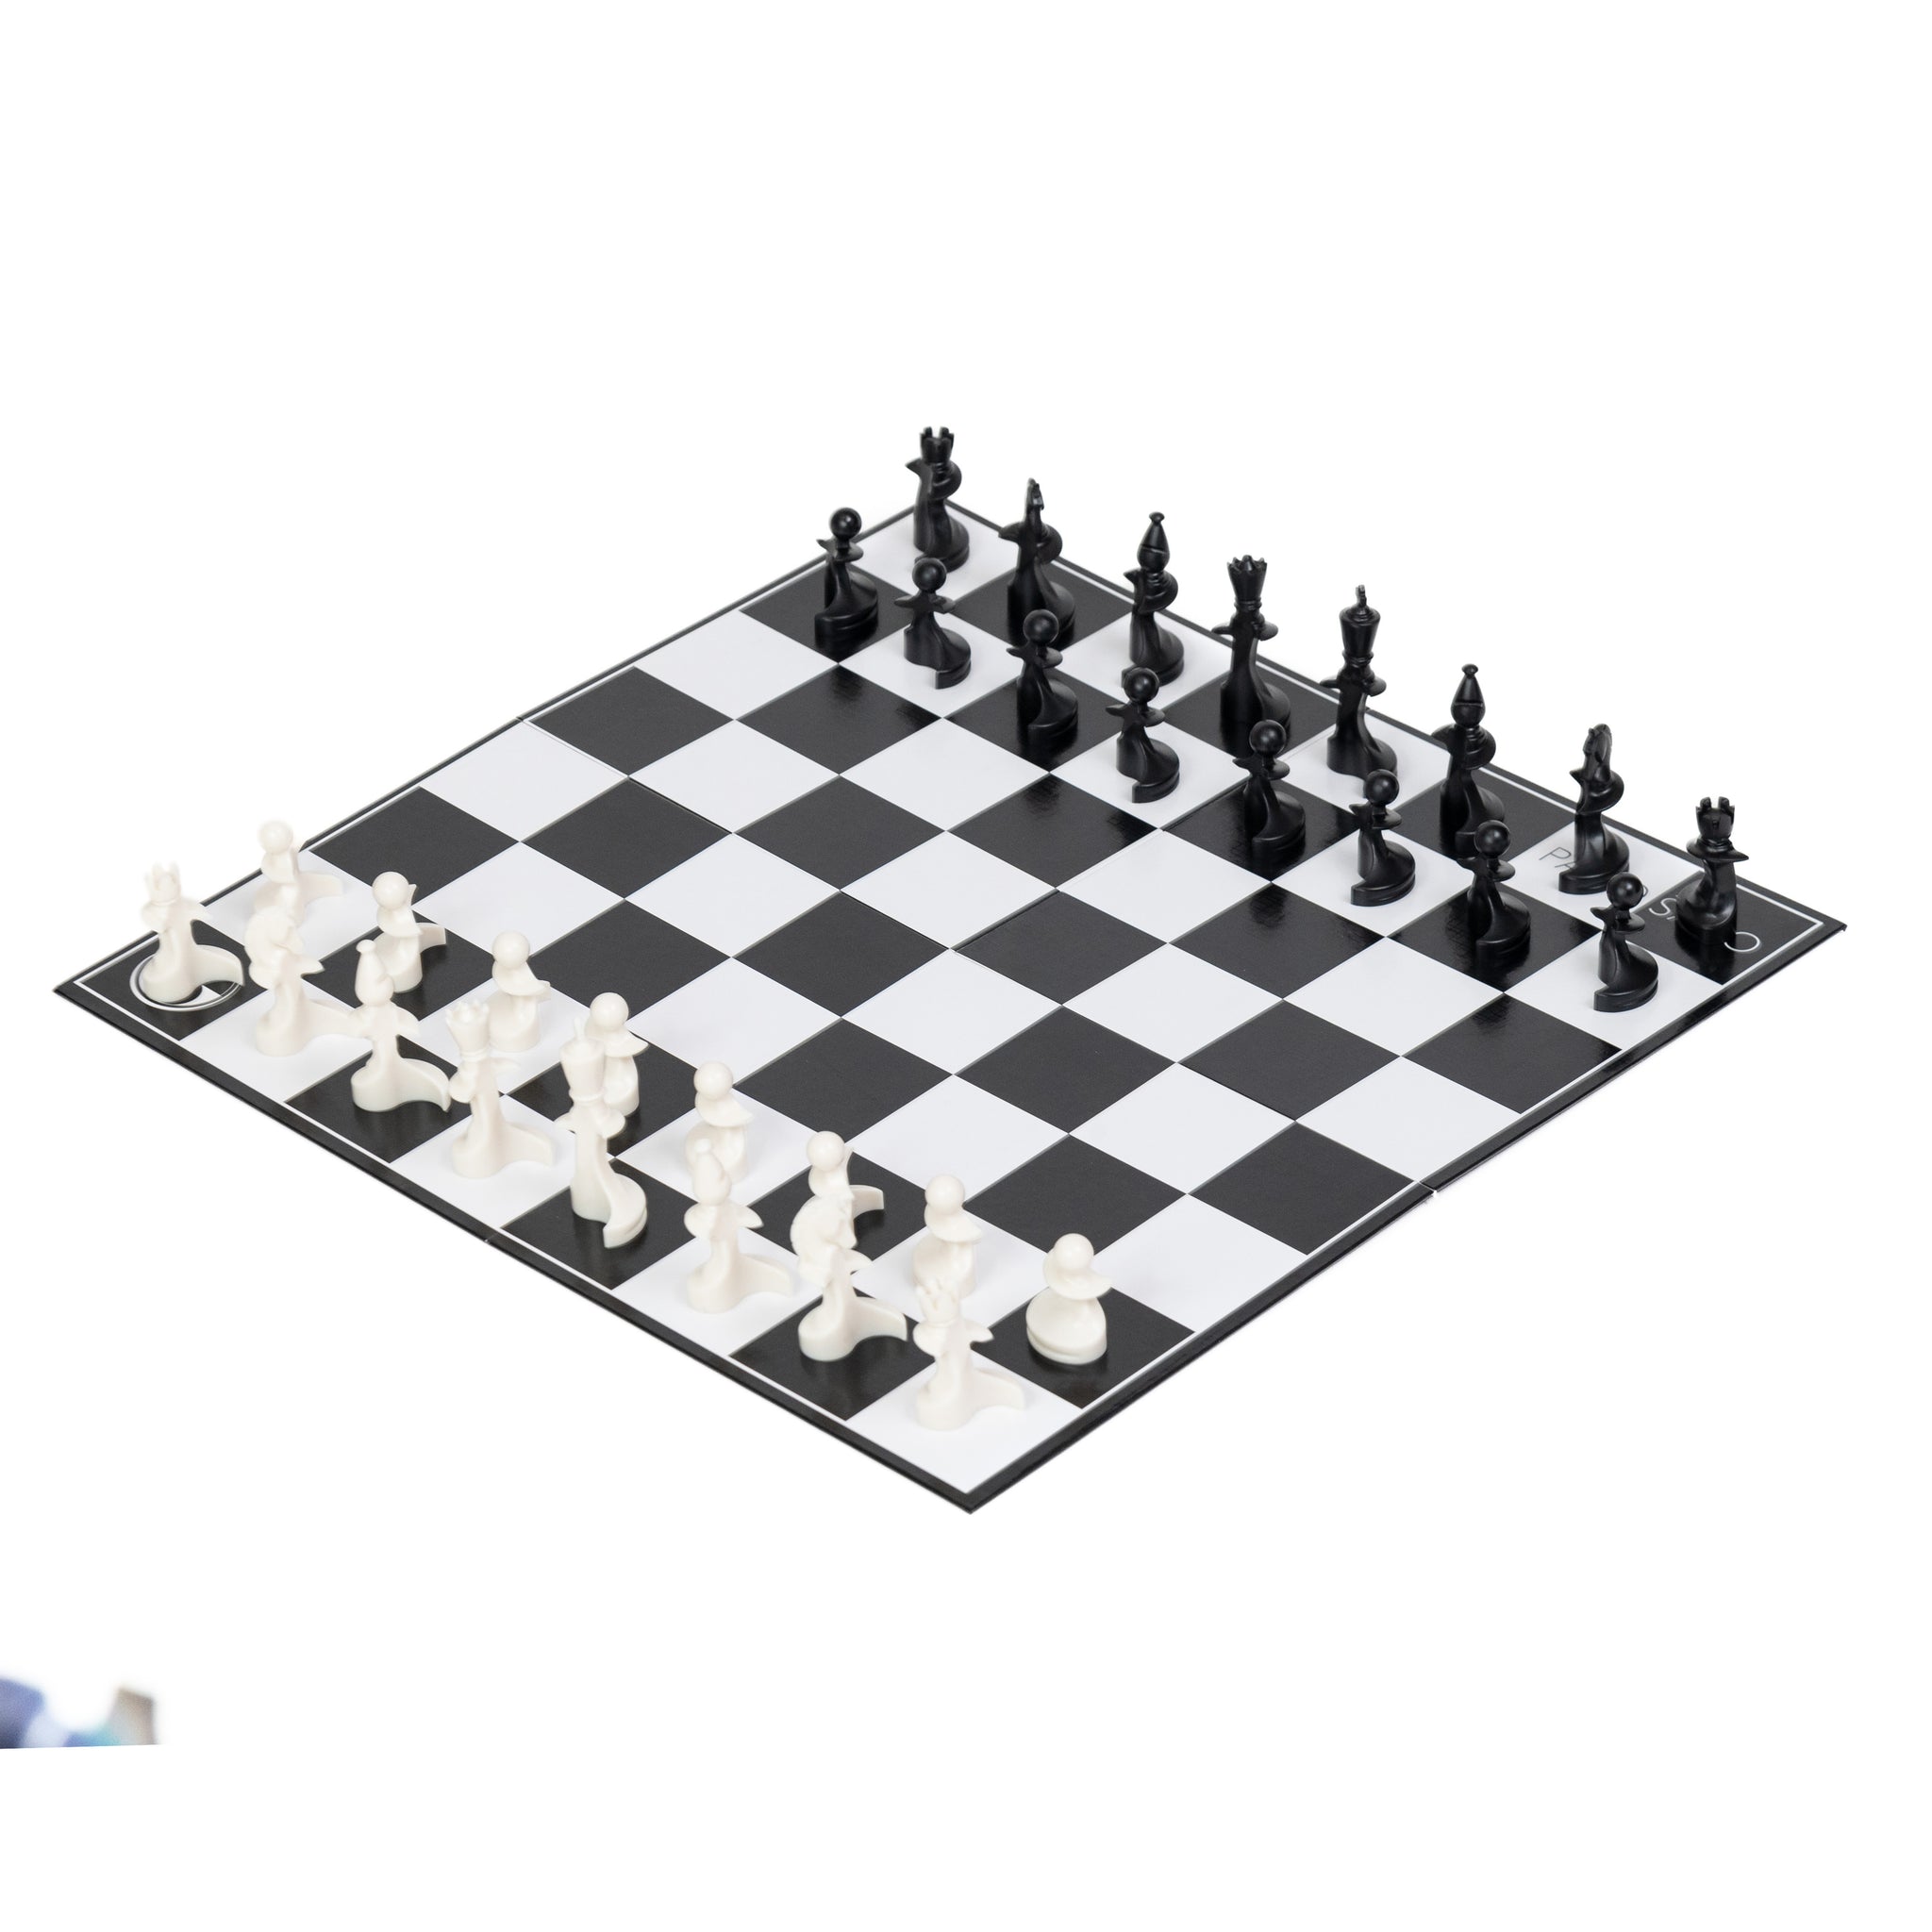 Paco Sako Peace Chess Game, Super Fun for Chess Lovers, Make Peace While  Playing Chess Foe 2 players, not War - Board Game for Peace Makers